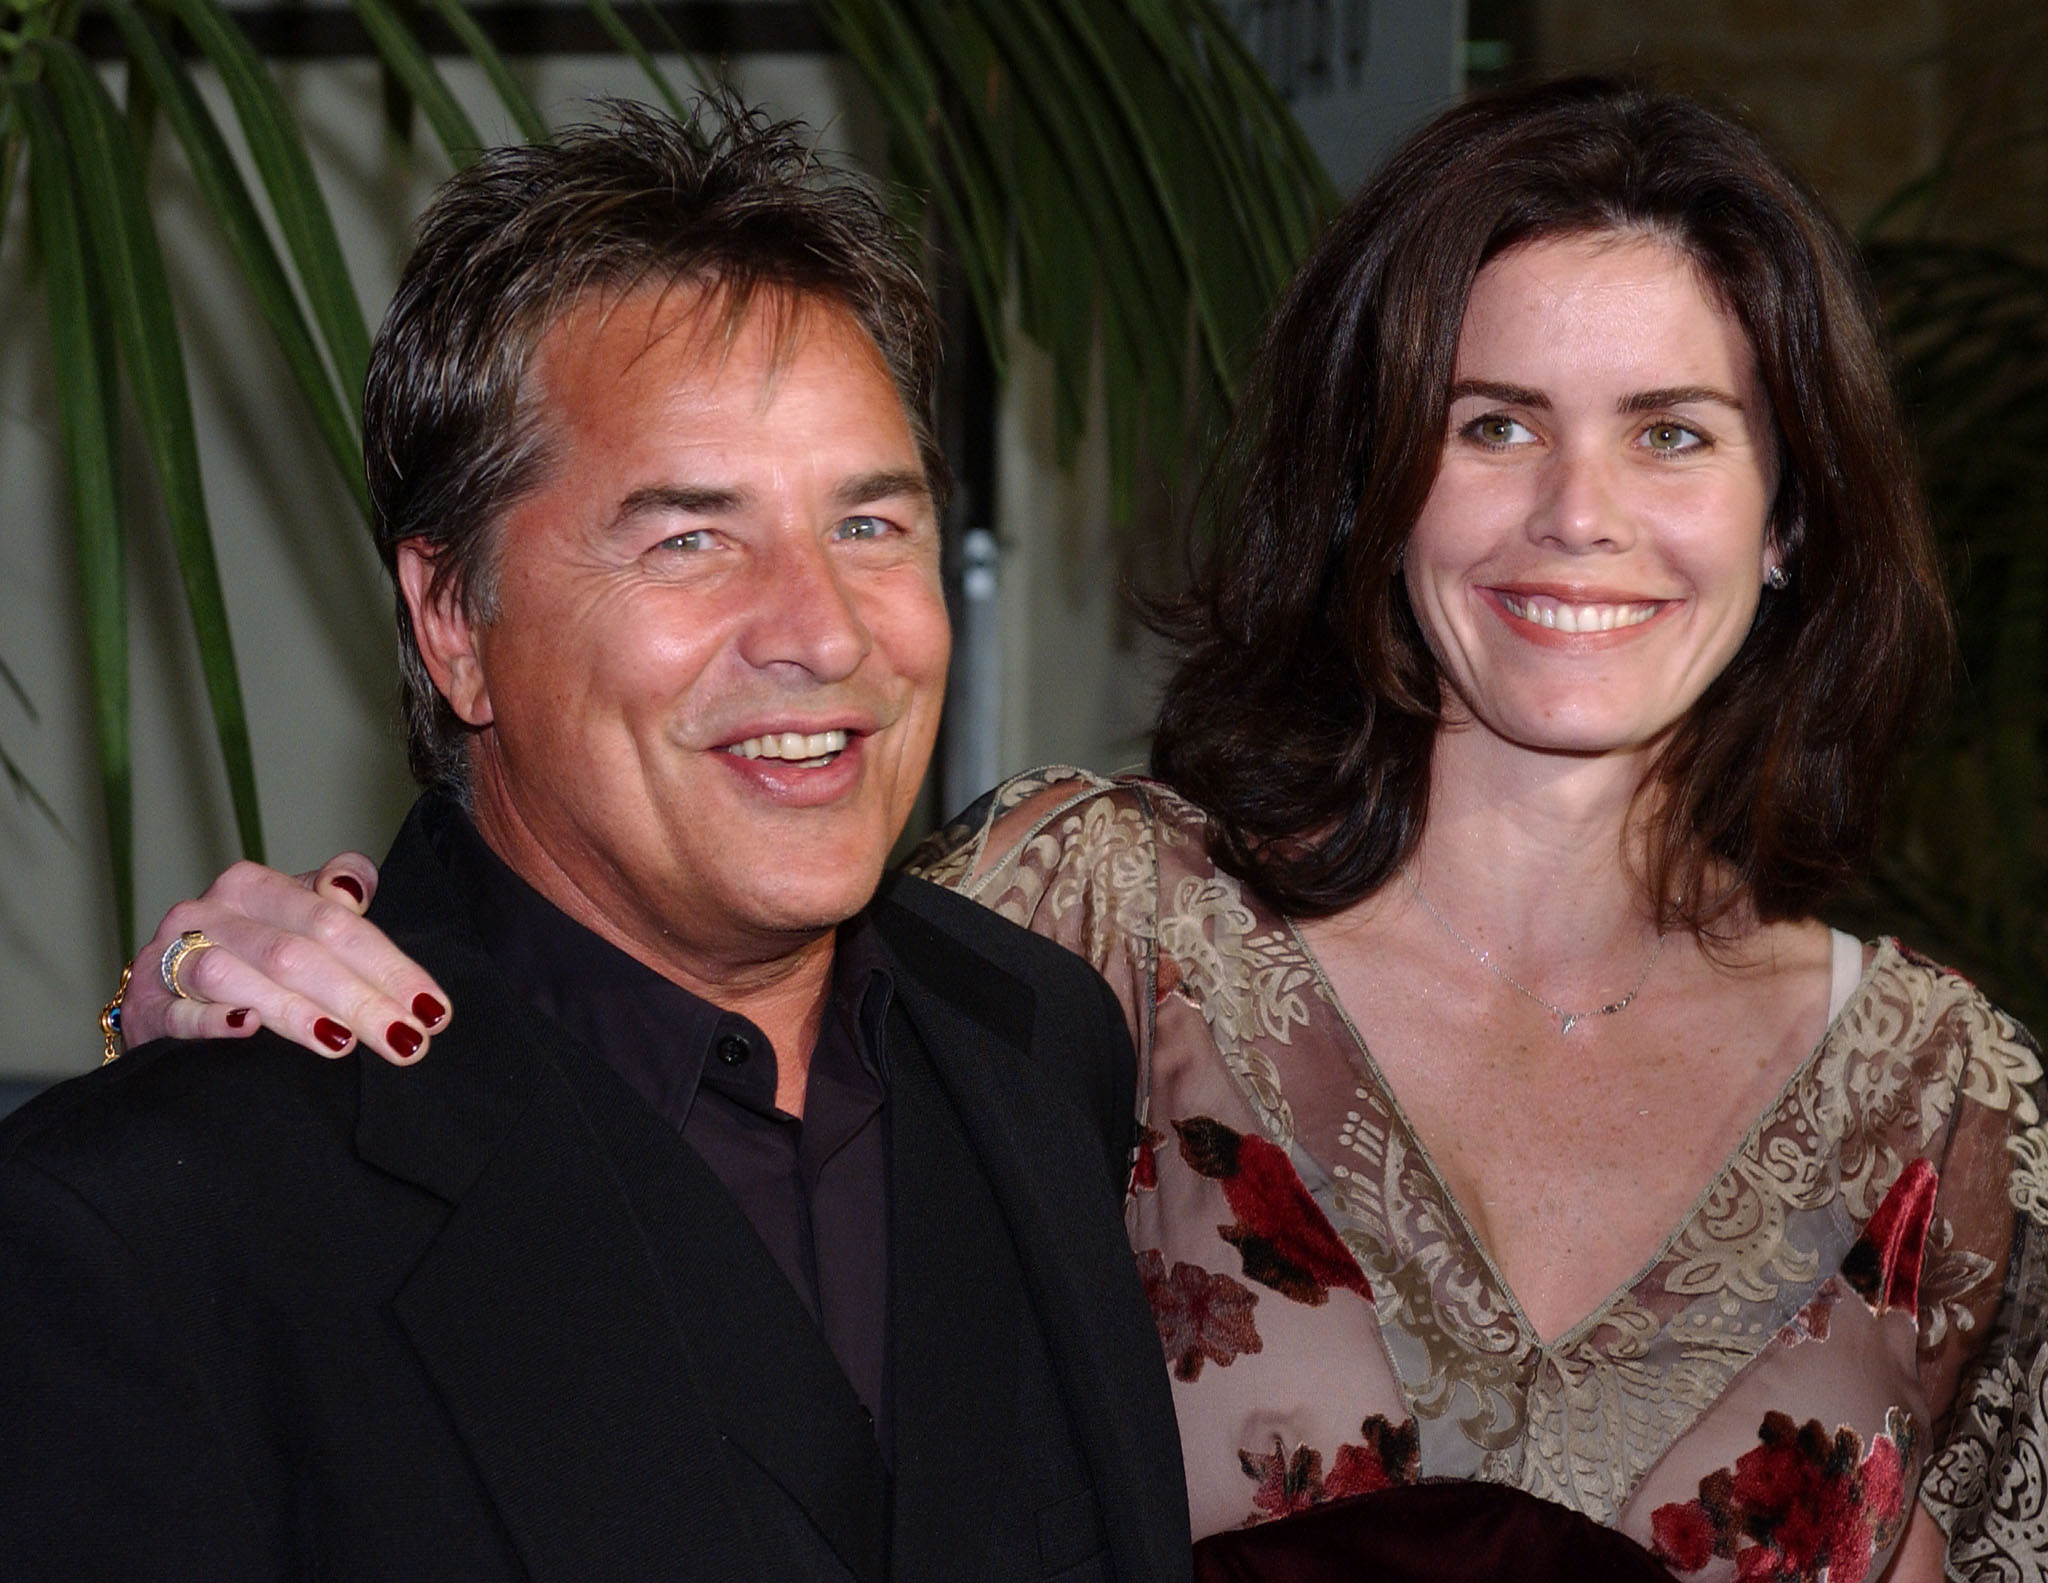 Don Johnson and his wife Kelley Phleger at the Fulfillment Fund Stars Benefit Gala honoring Jeffrey Katzenberg in Los Angeles, on November 8, 2001 | Source: Getty Images